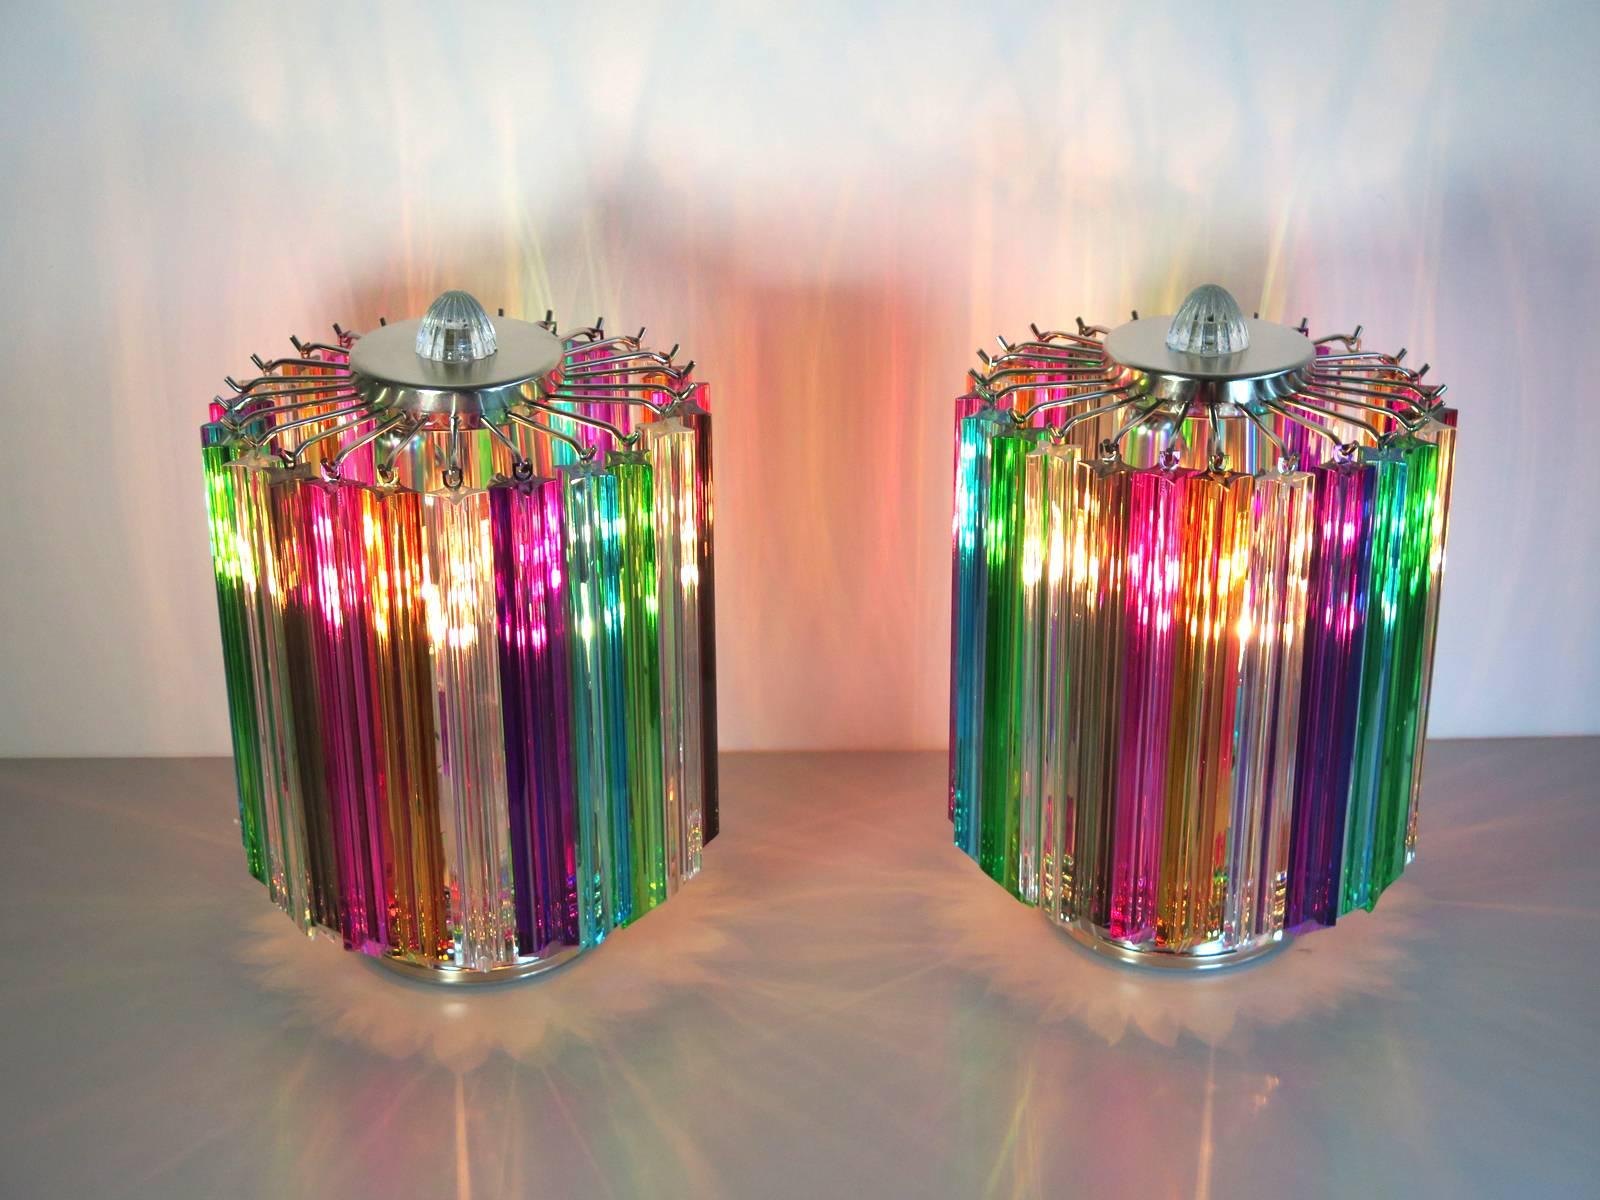 Magnificent pair of table lamps, 24 quadriedri Murano crystal multicolored prism for each lamp. Nickel metal frame. Elegant object of furniture.
Period: late 20th century
Dimensions: 15 inches (38 cm) height; 10.50 inches (27 cm)